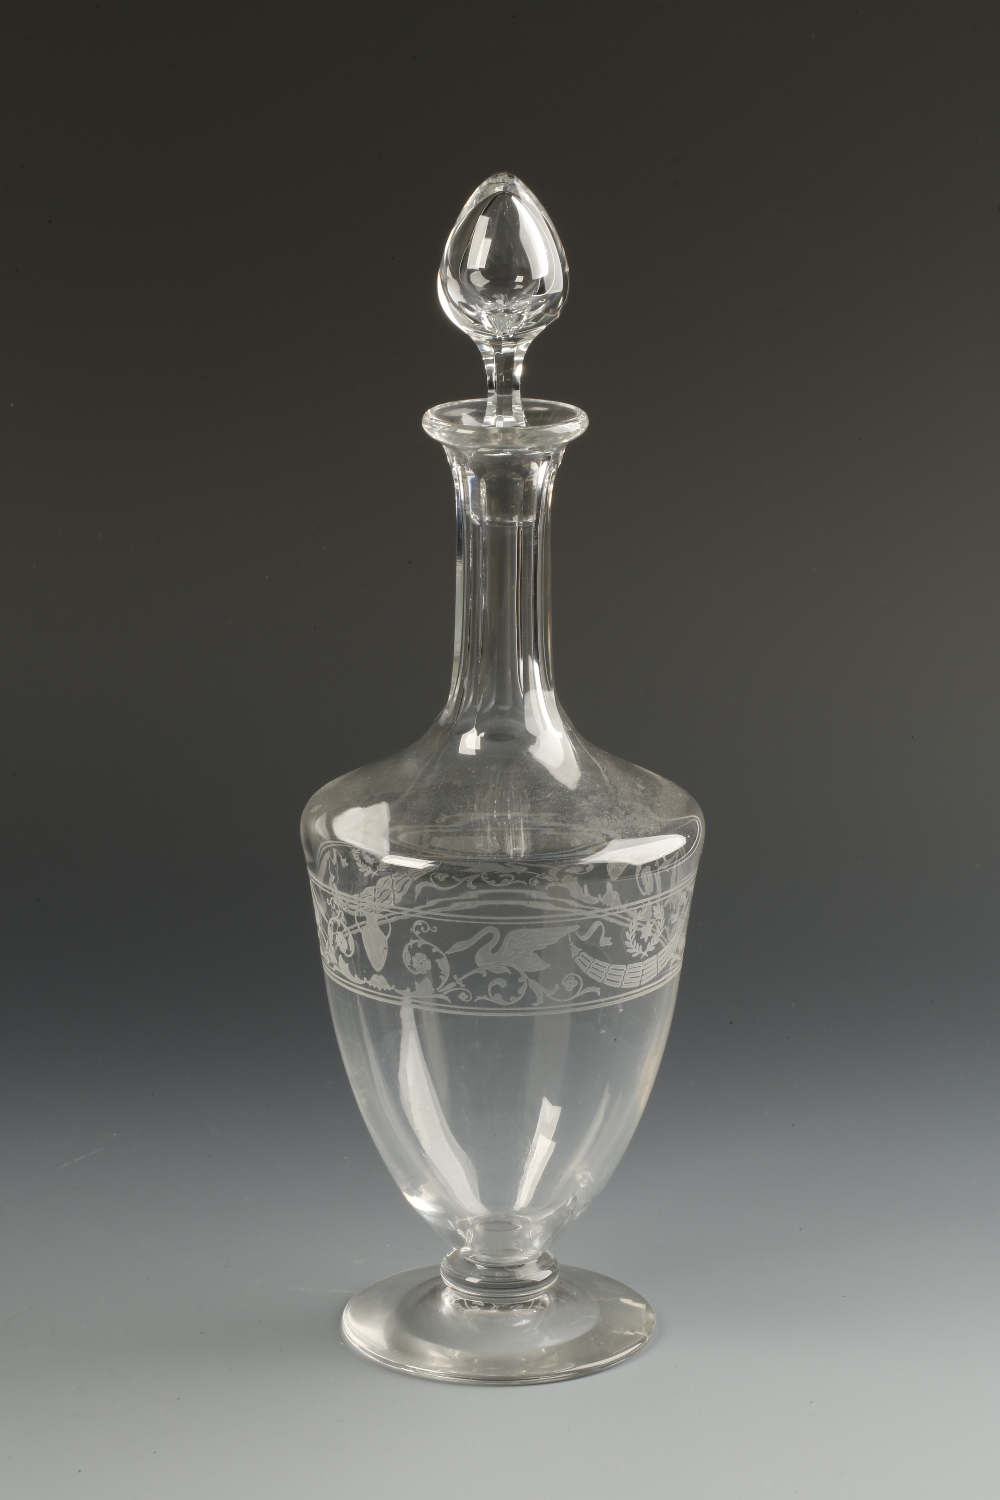 BACCARAT: A CLEAR GLASS GRECIAN REVIVAL DECANTER with a panel-cut neck and vase-shaped body with